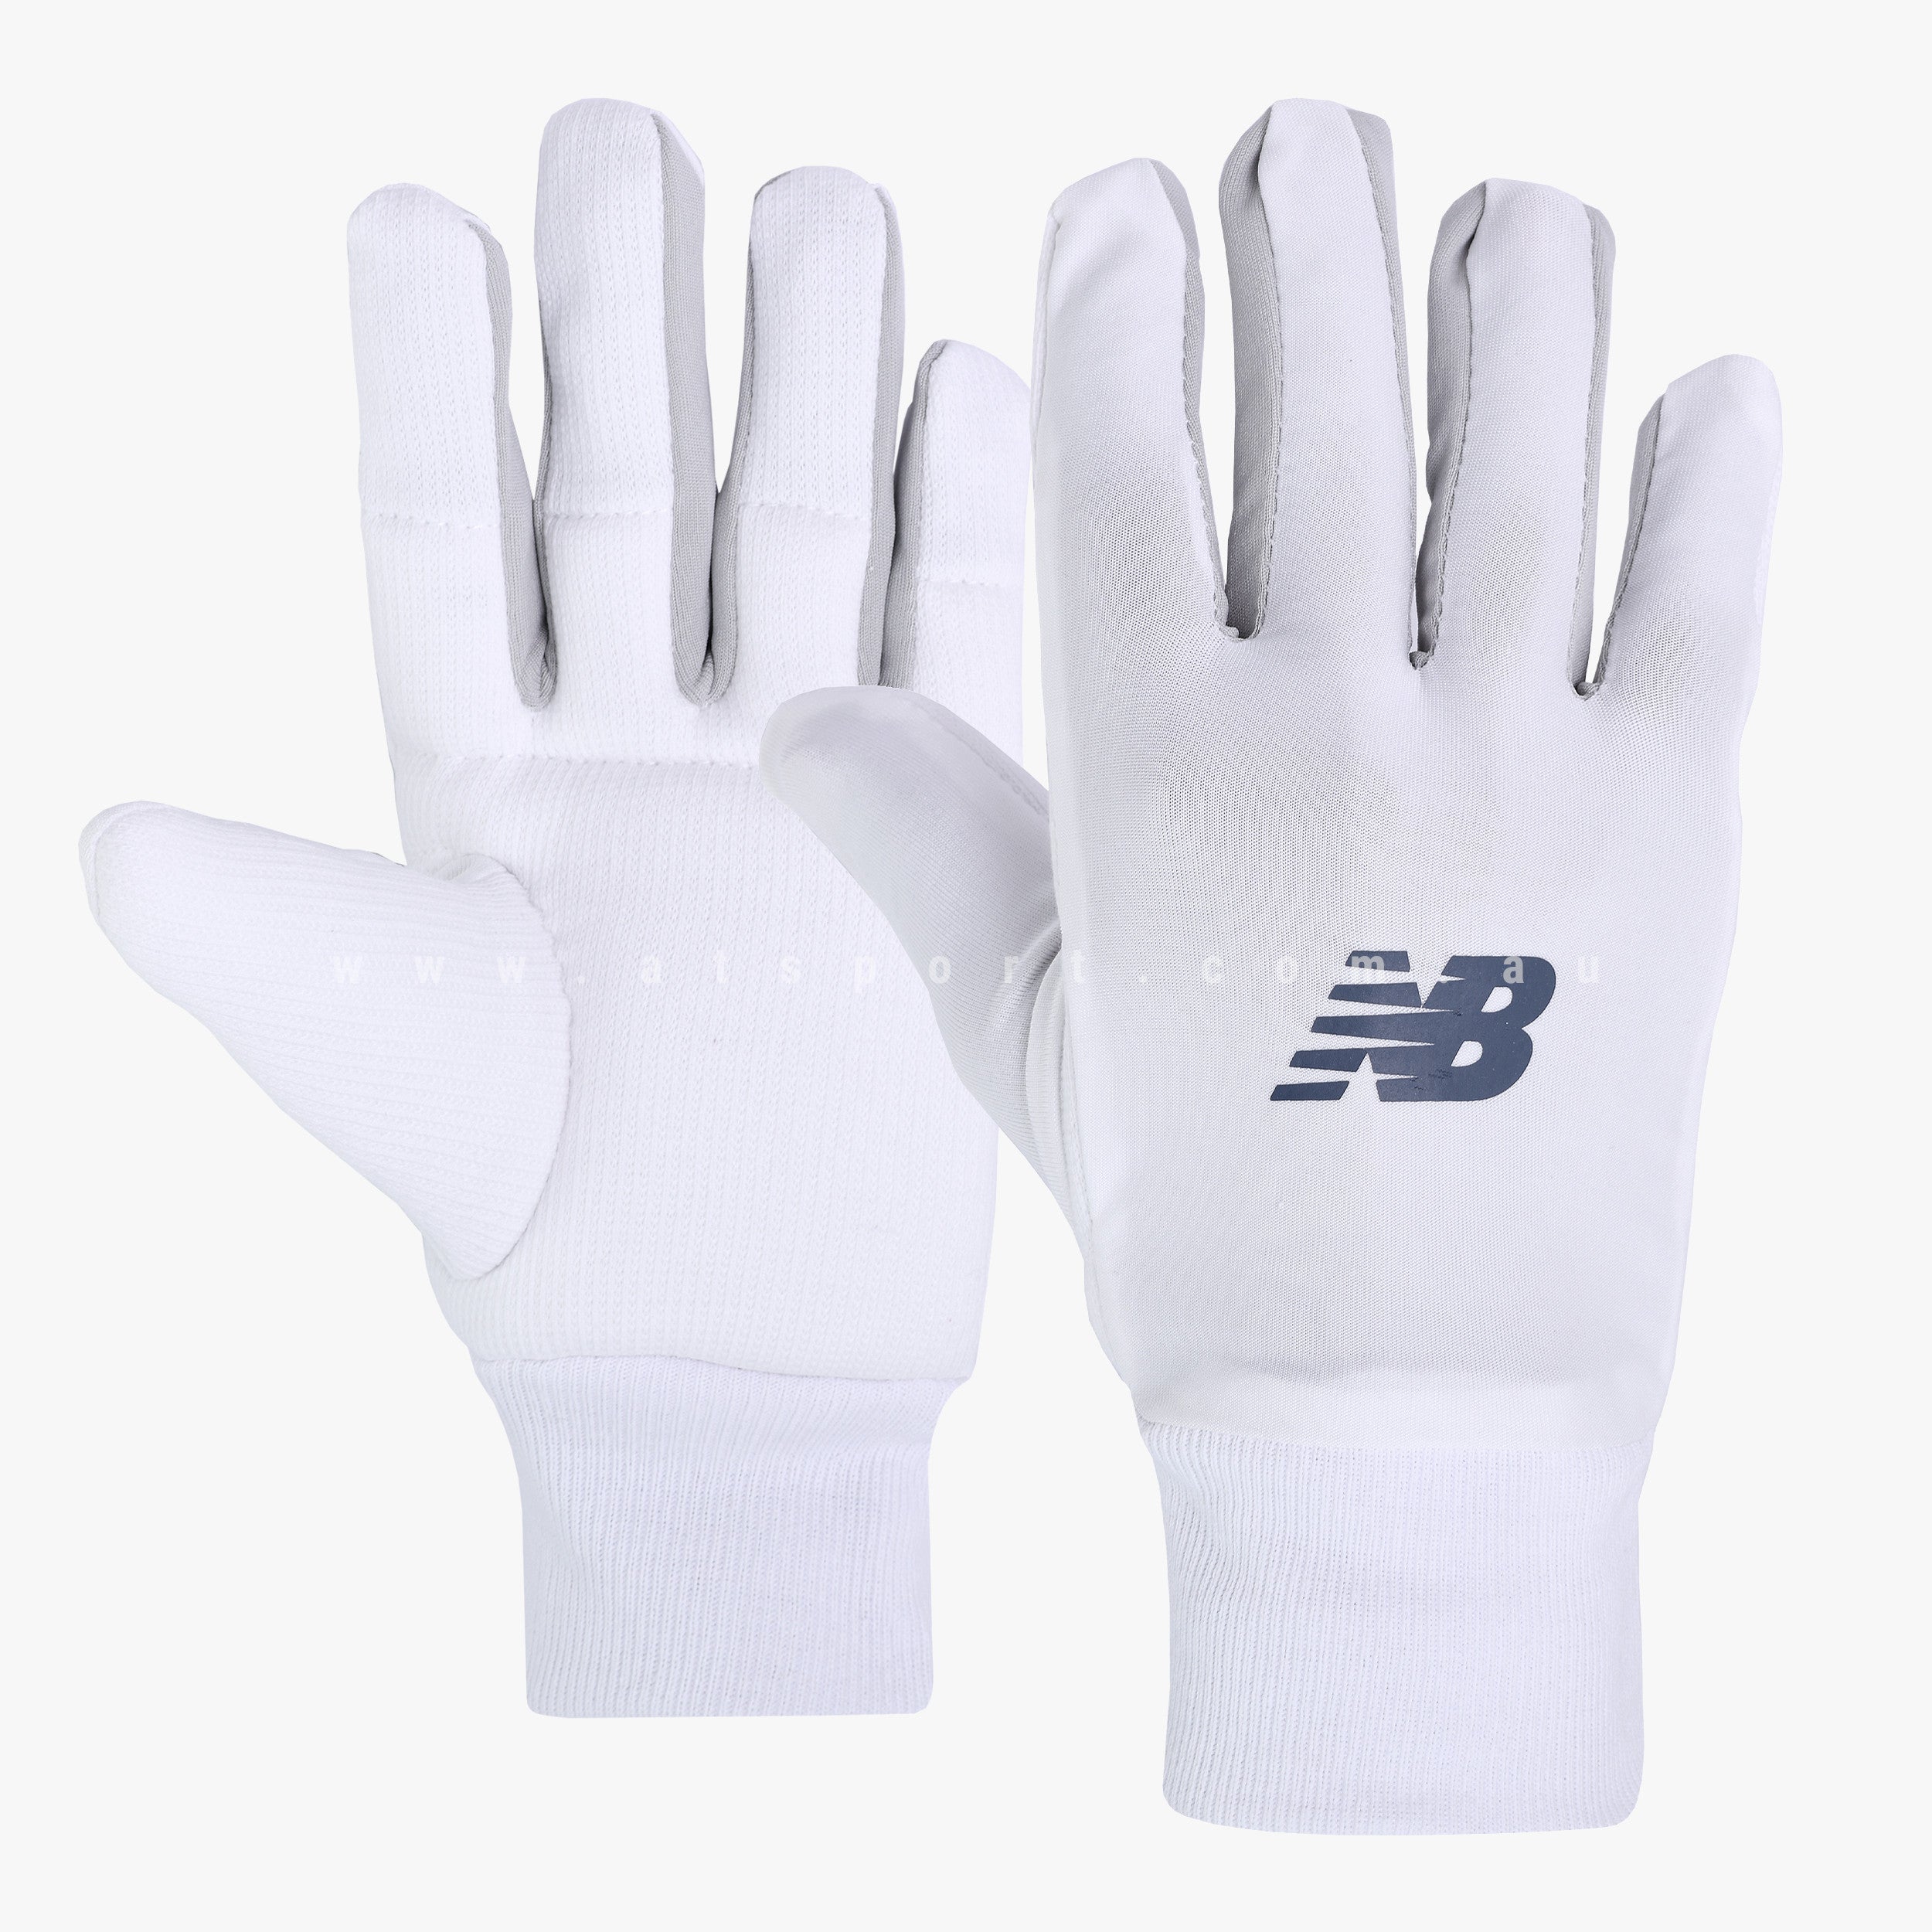 New Balance Cotton INNER Wicket Keeping Gloves - ADULT